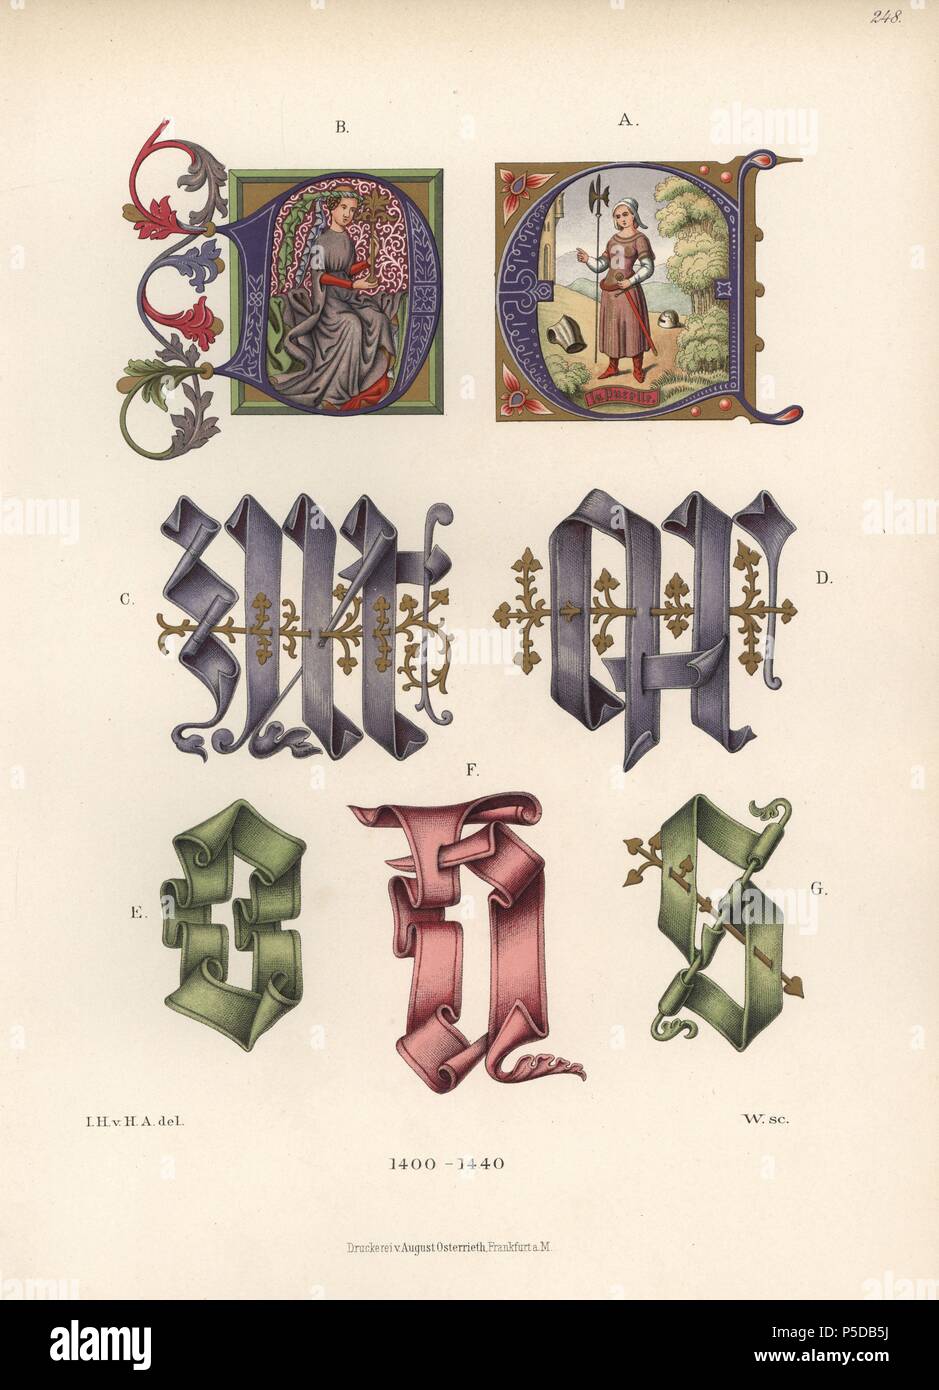 Initials from illuminated manuscripts of the early 15th century, from libraries in Paris, Heidelberg and Munich. Chromolithograph from Hefner-Alteneck's 'Costumes, Artworks and Appliances from the early Middle Ages to the end of the 18th Century,' Frankfurt, 1883. IIlustration drawn by Hefner-Alteneck, lithographed by W, and published by Heinrich Keller. Dr. Jakob Heinrich von Hefner-Alteneck (1811-1903) was a German archeologist, art historian and illustrator. He was director of the Bavarian National Museum from 1868 until 1886. Stock Photo